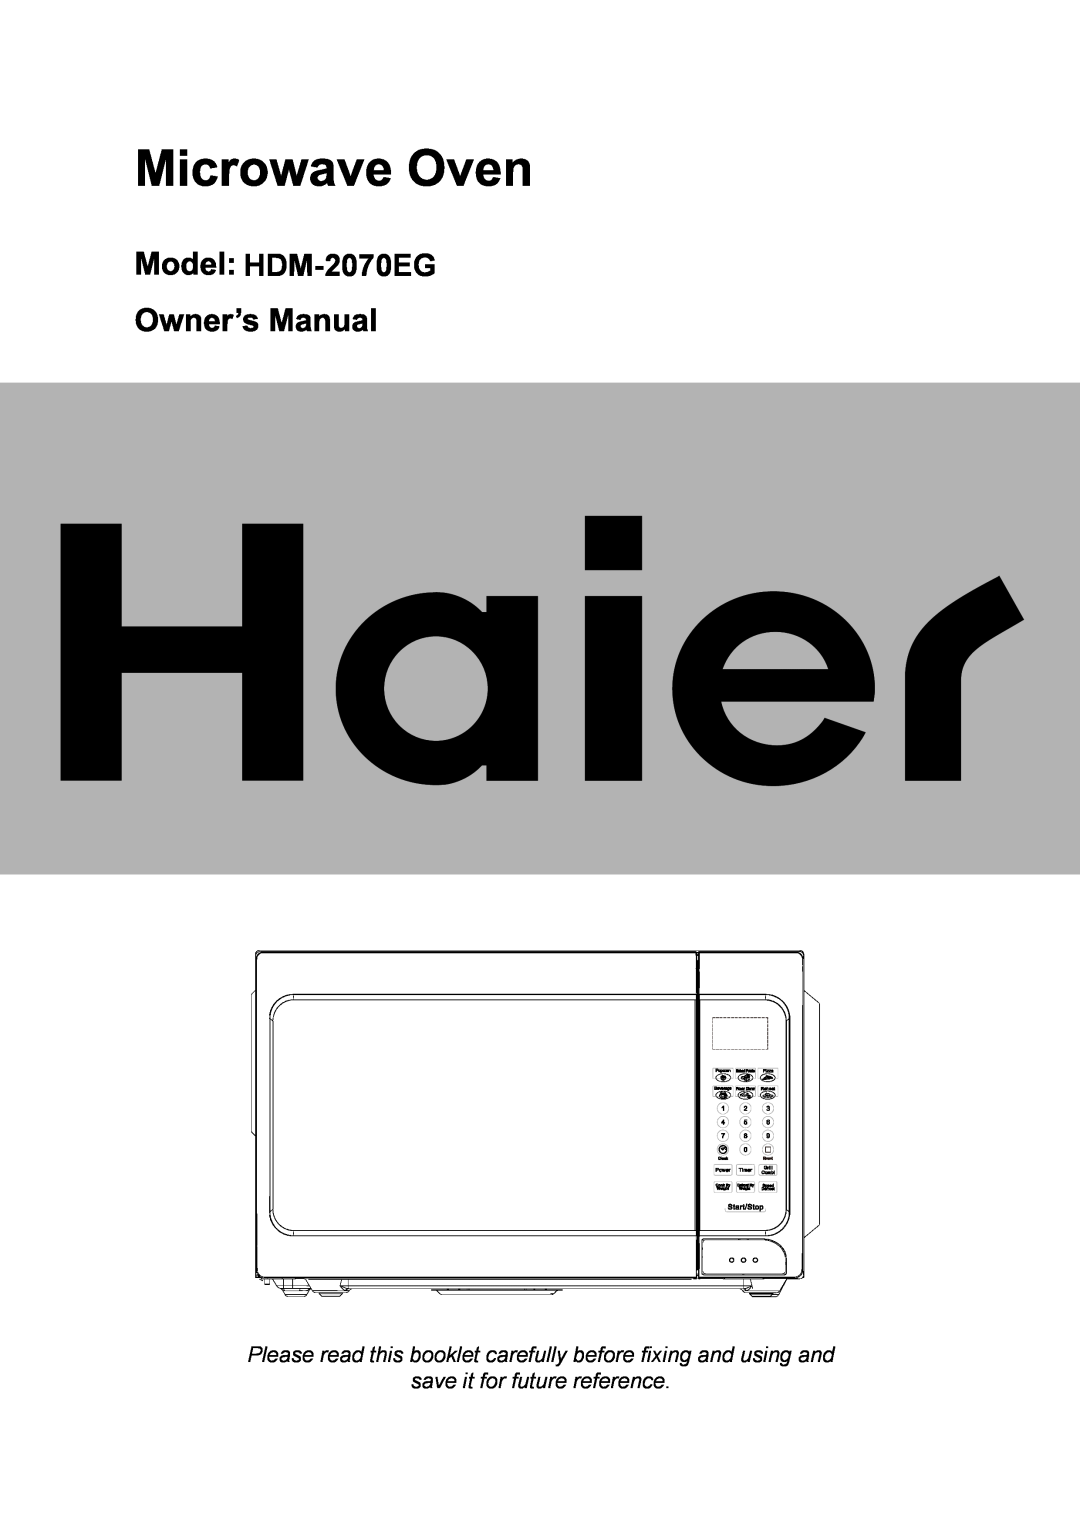 Haier HDM-2070EG manual Please read this booklet carefully before fixing and using and, save it for future reference 